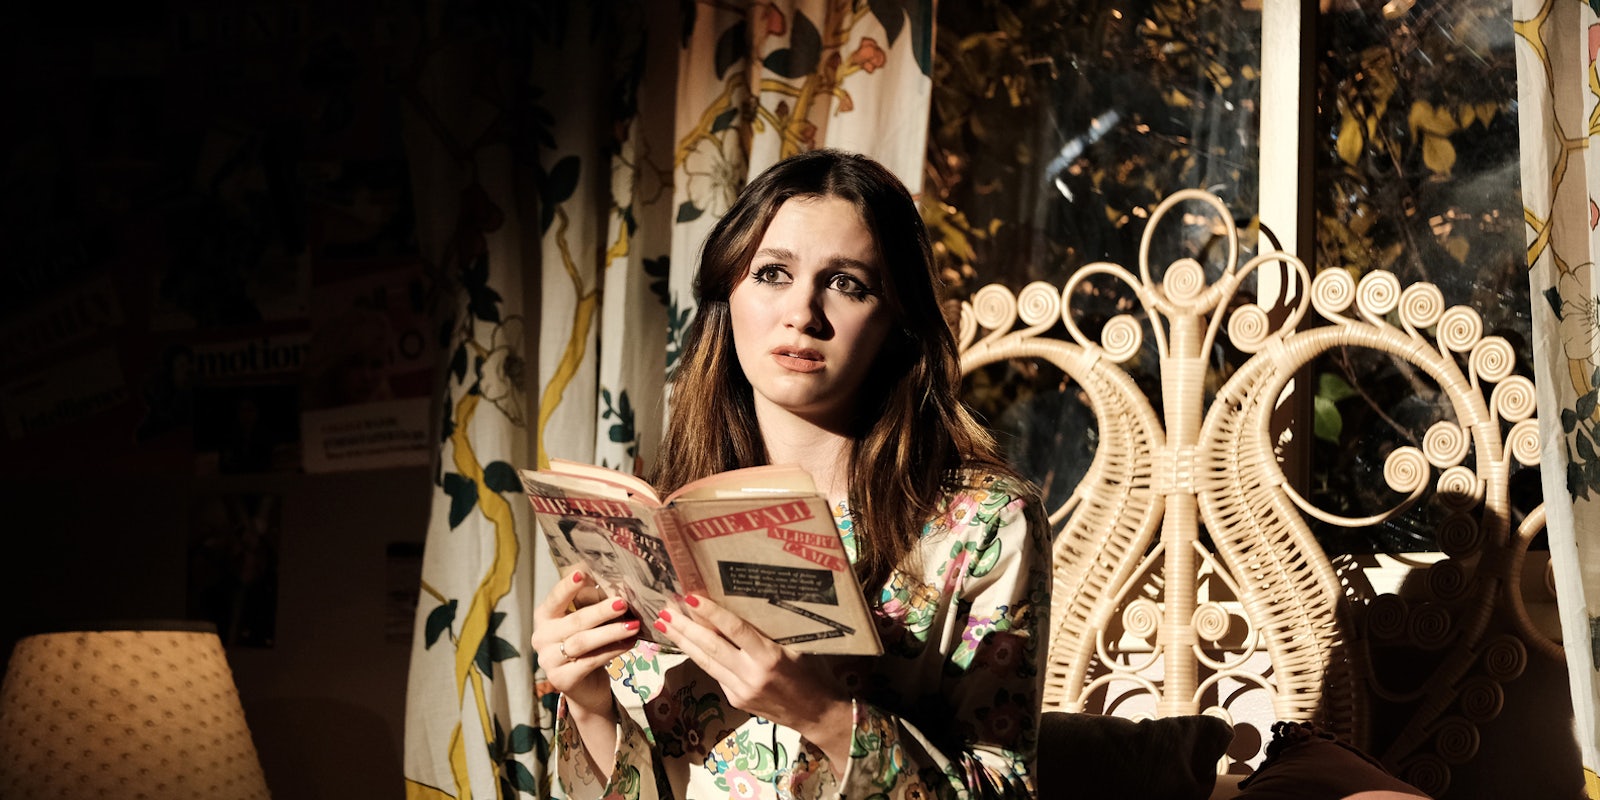 maude apatow reading a book on a bed in a scene from the tv show euphoria